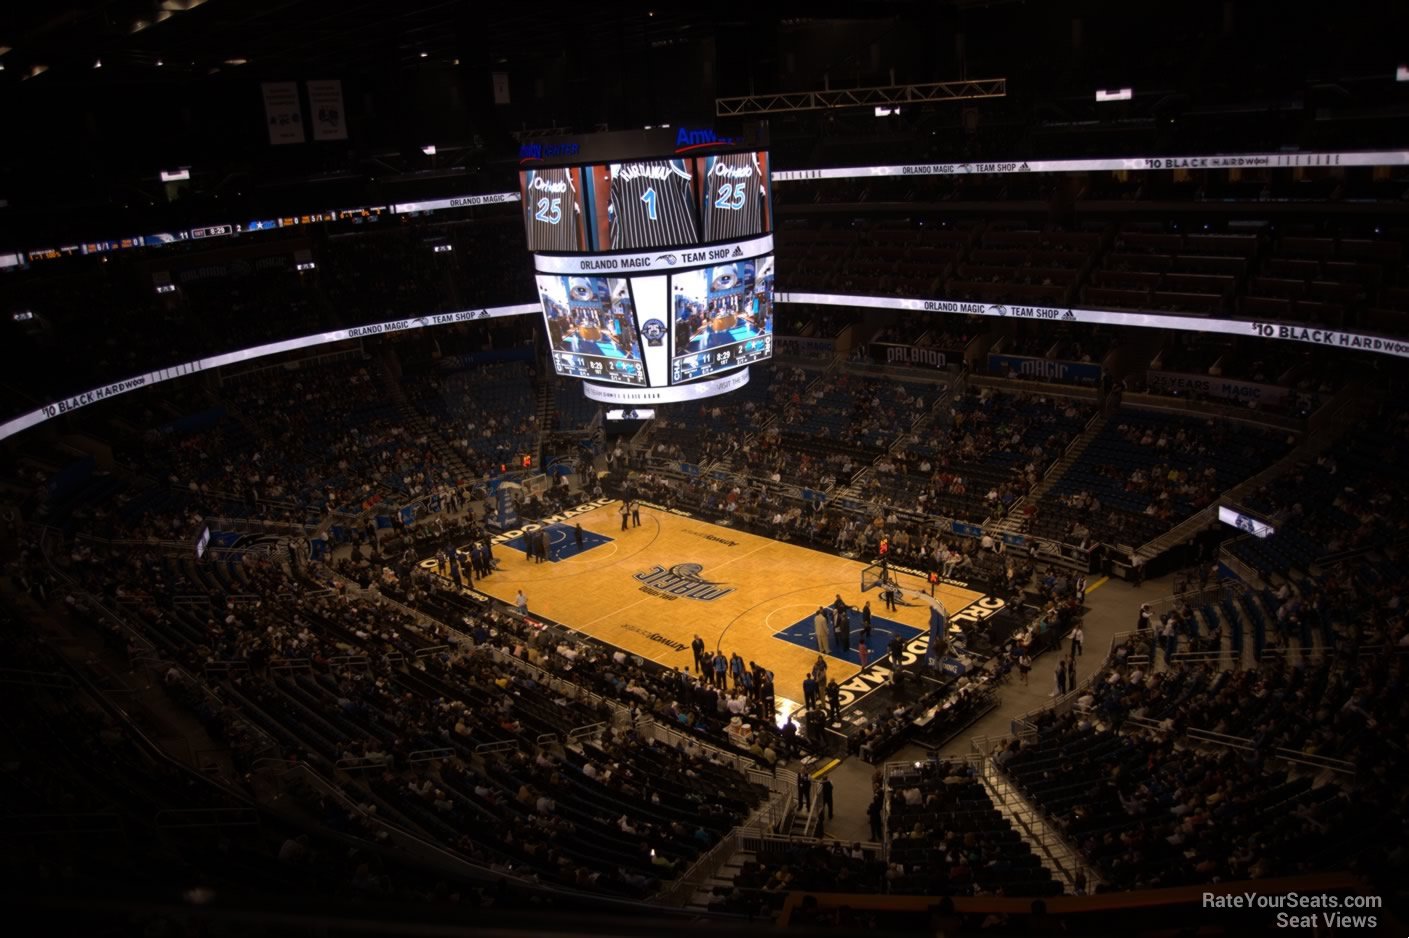 section 205 seat view  for basketball - amway center